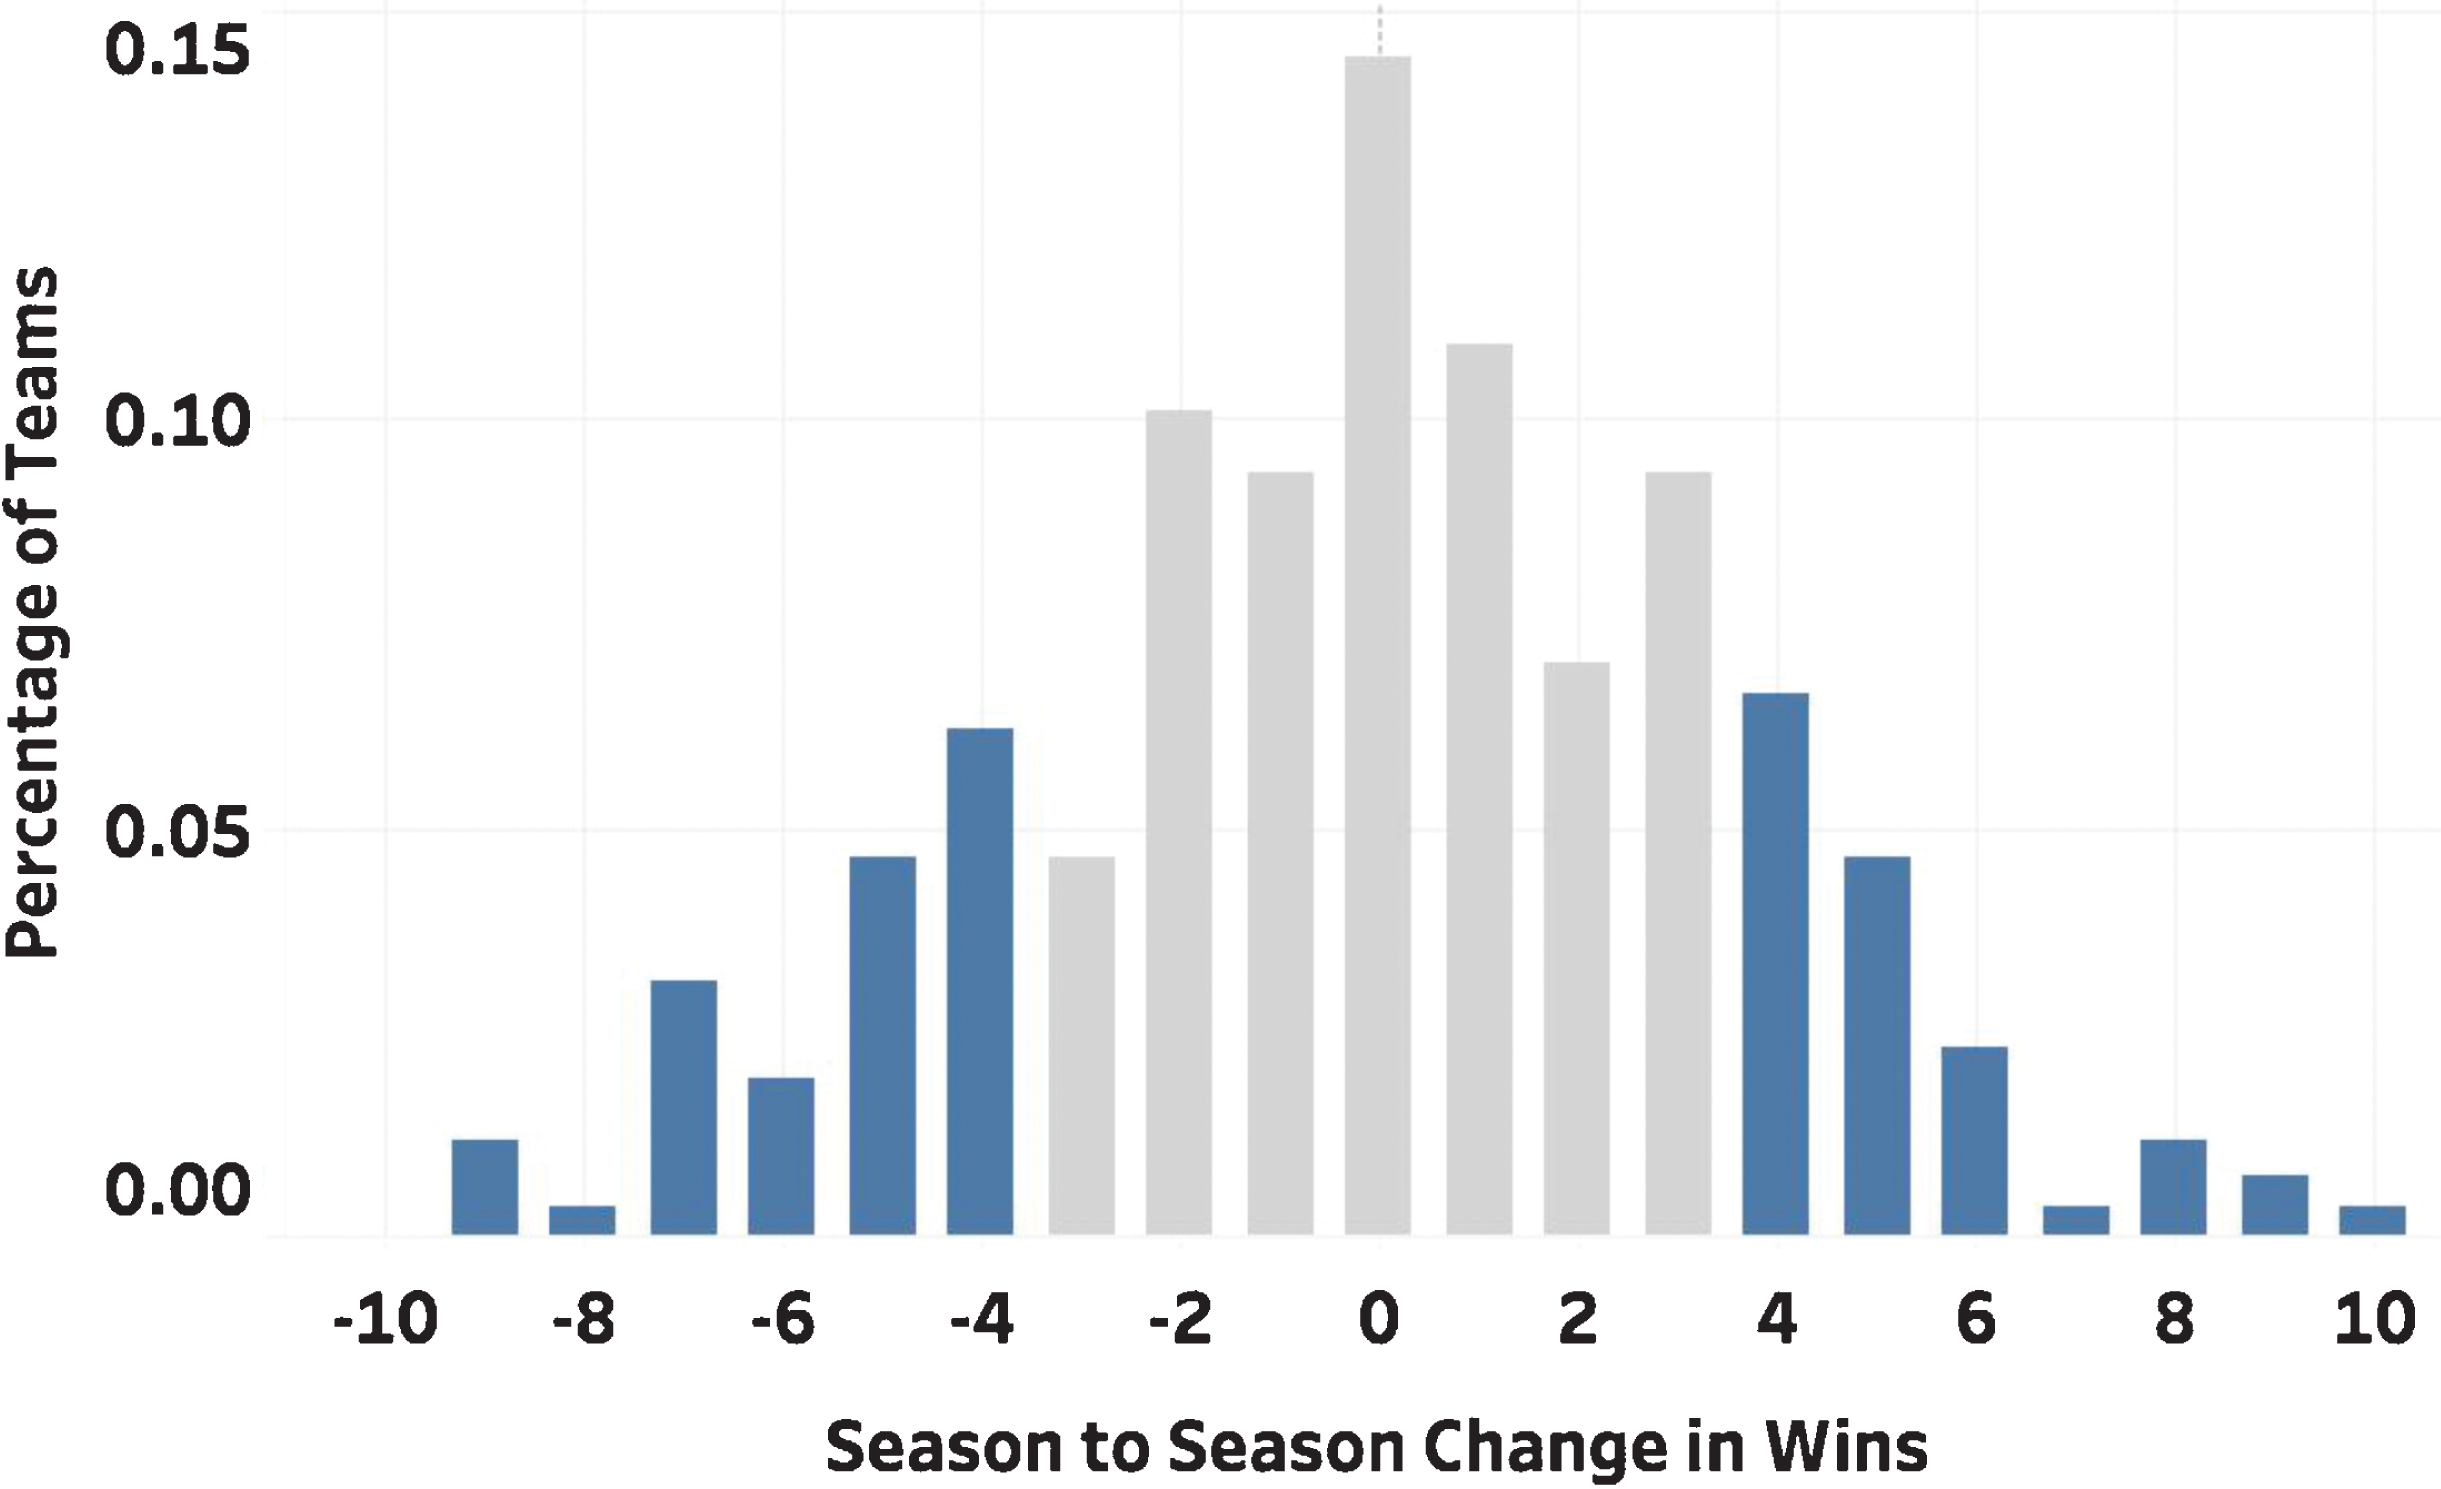 Season to season change in wins for all NFL teams from 2010–2018. Differences of at least ±4 wins account for 34% of teams and are highlighted in blue.